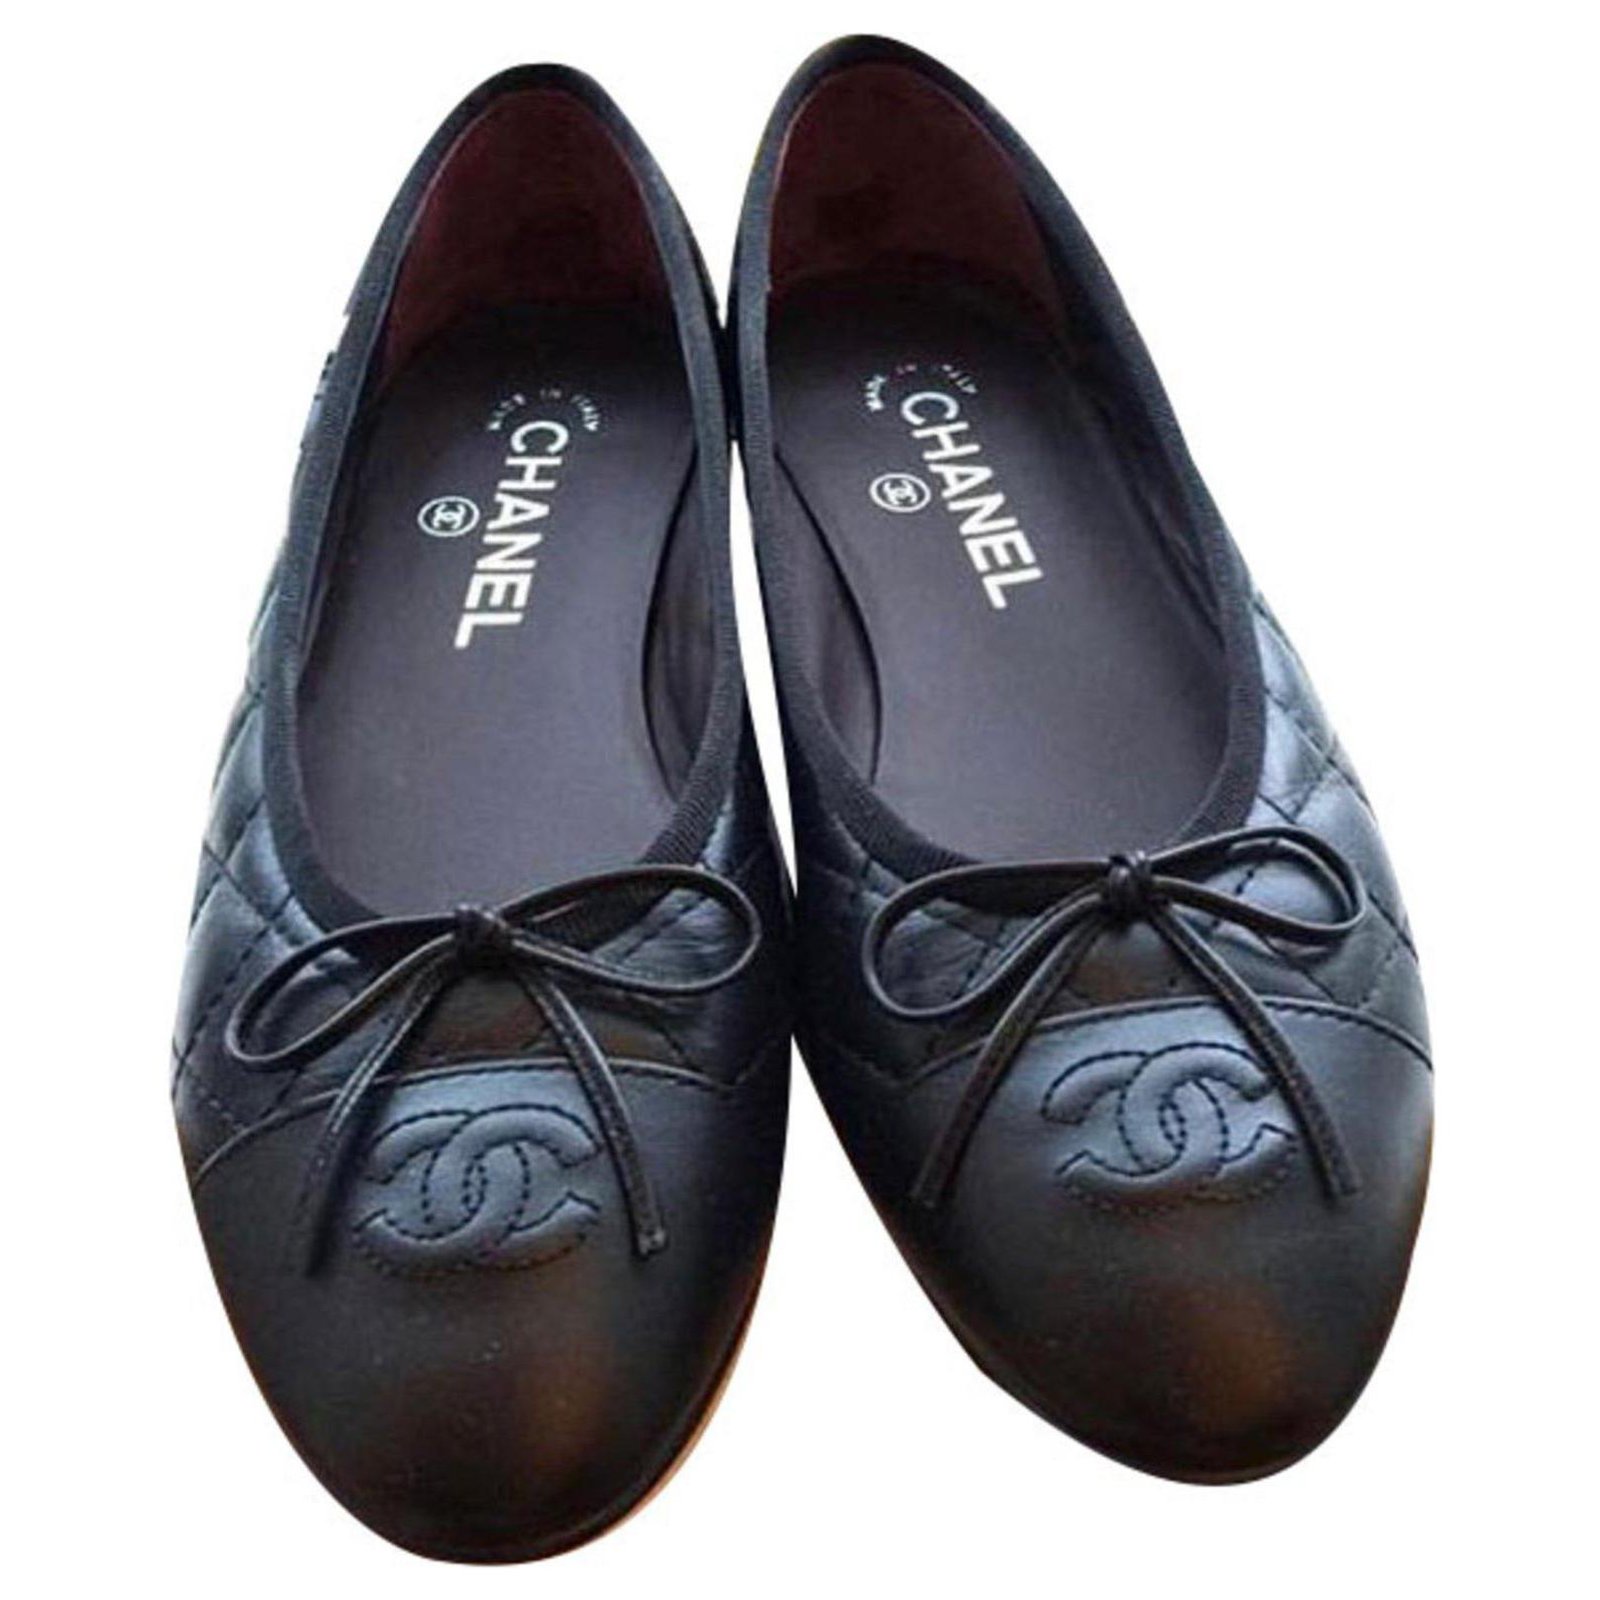 Leather ballet flats Chanel Black size 38.5 EU in Leather - 37867803